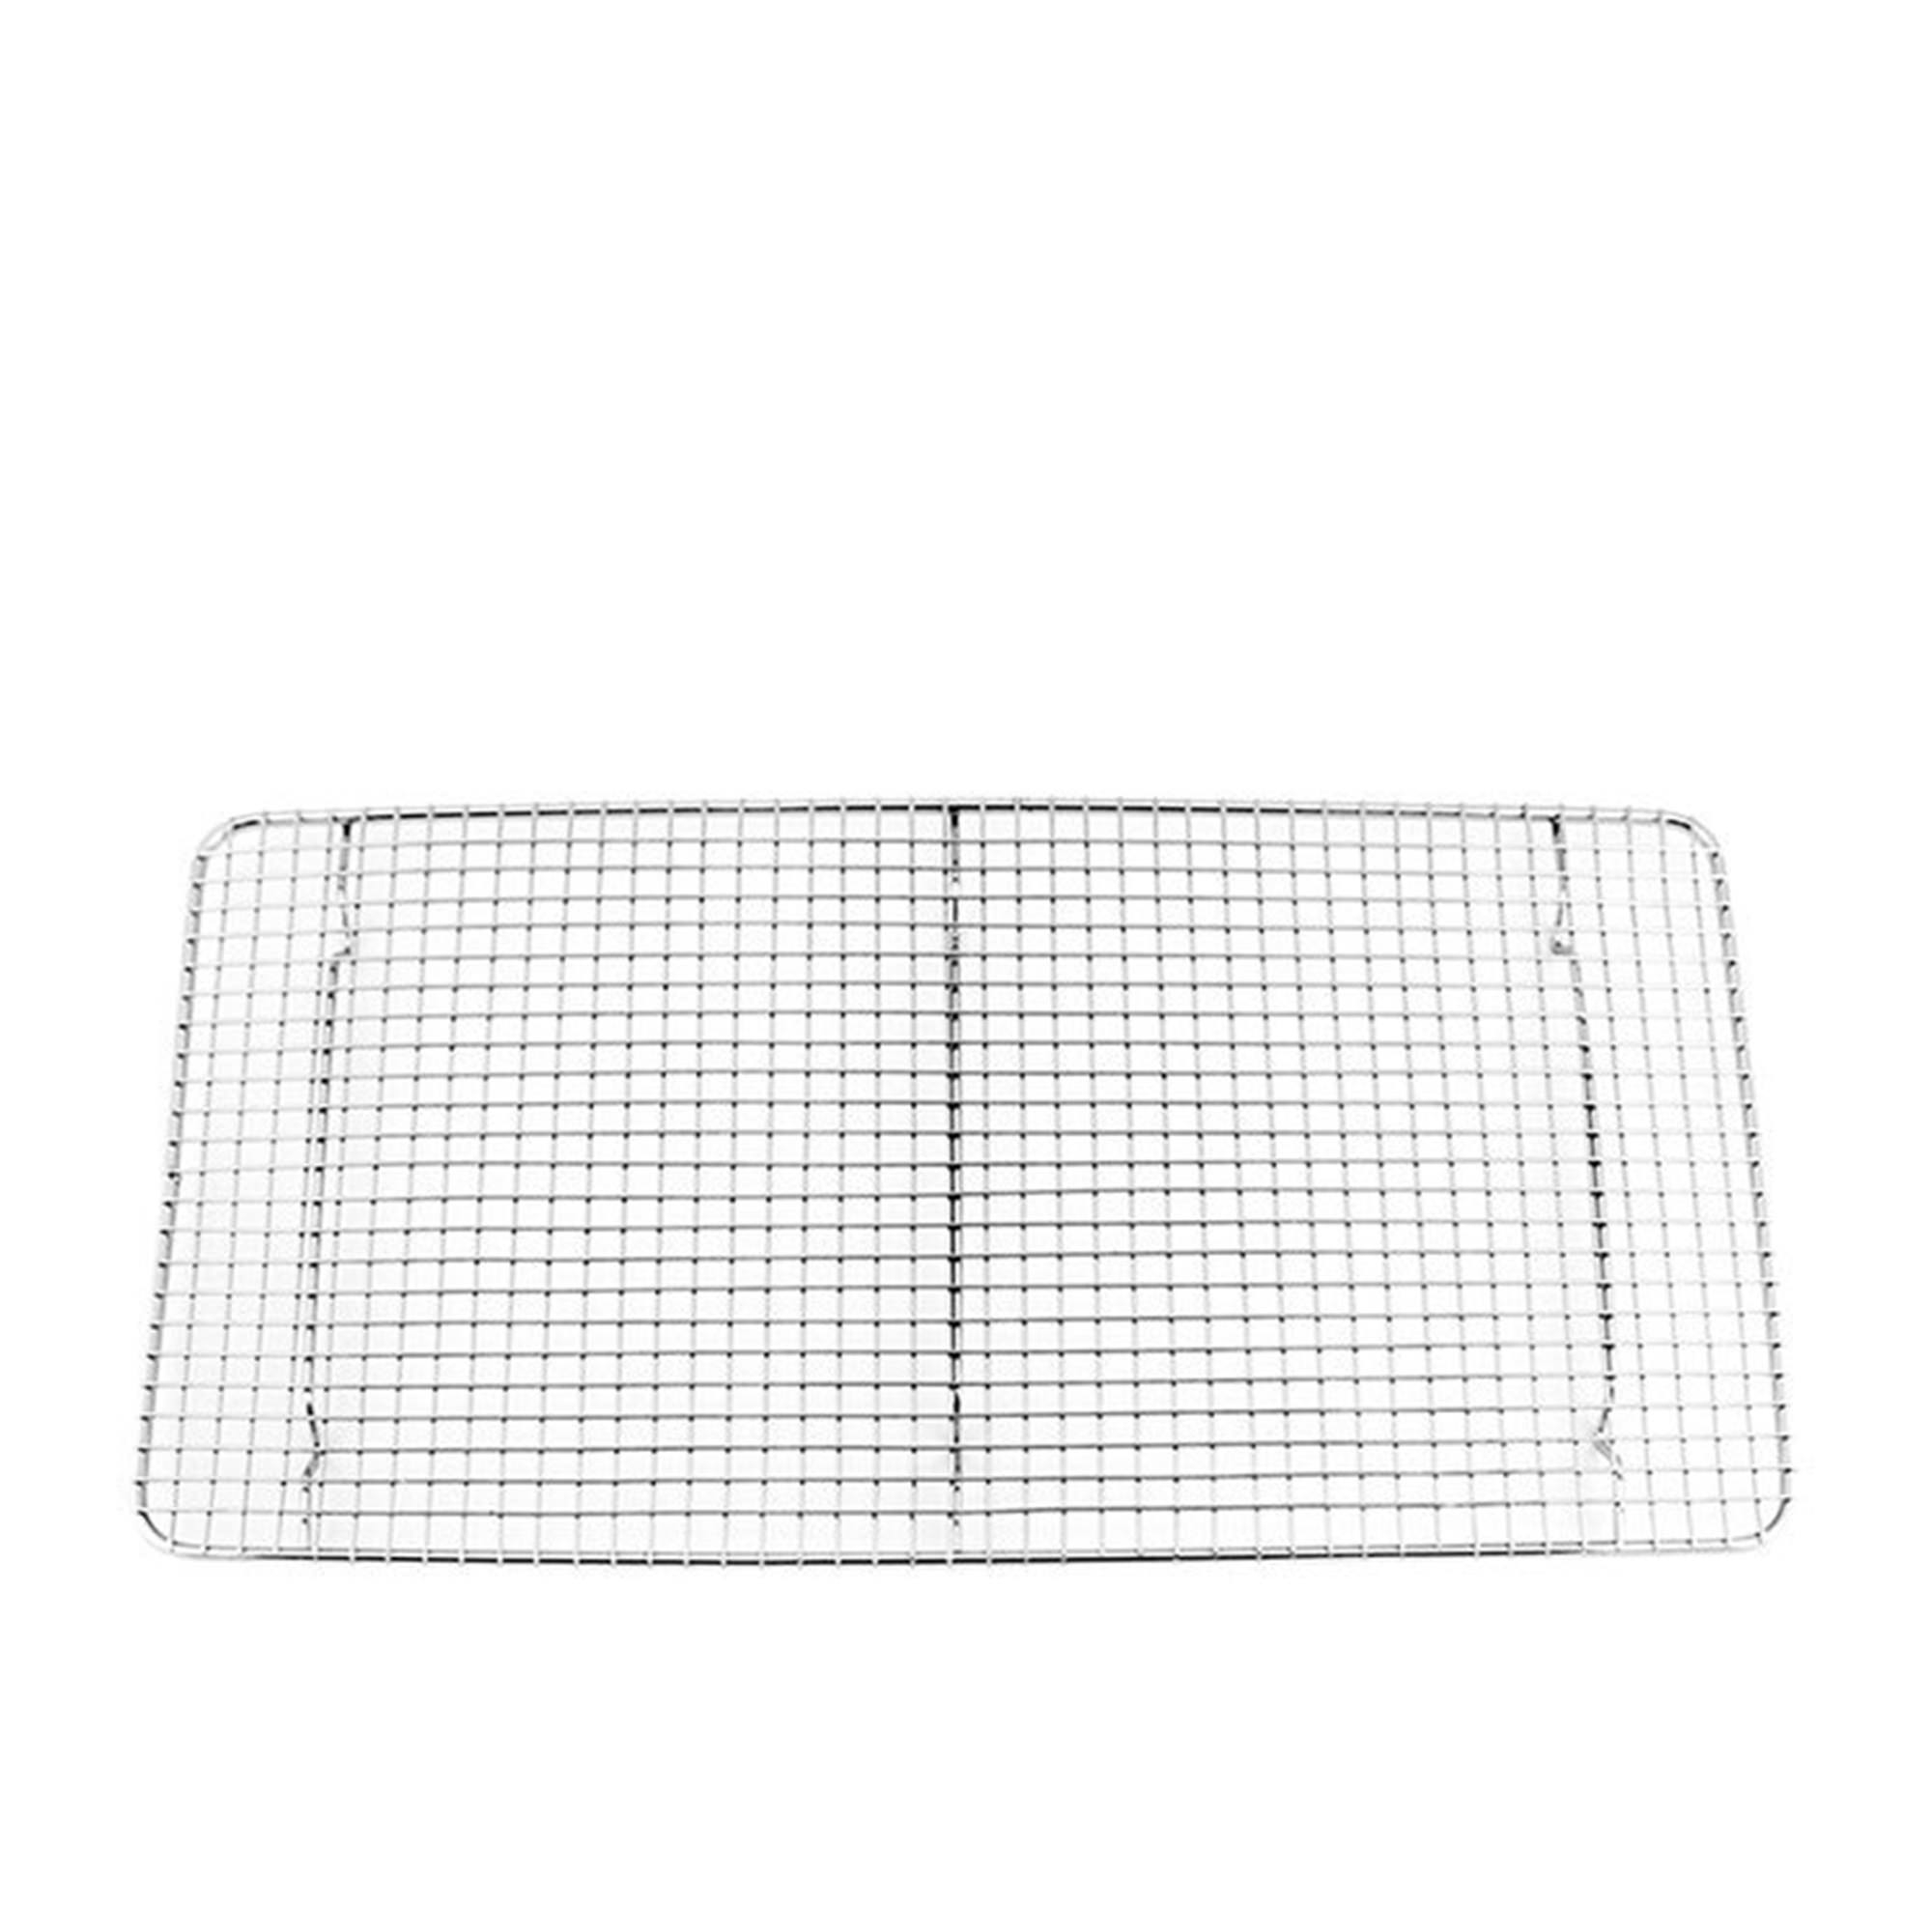 Chef Inox Cake Cooling Rack with Legs Full Size Image 1